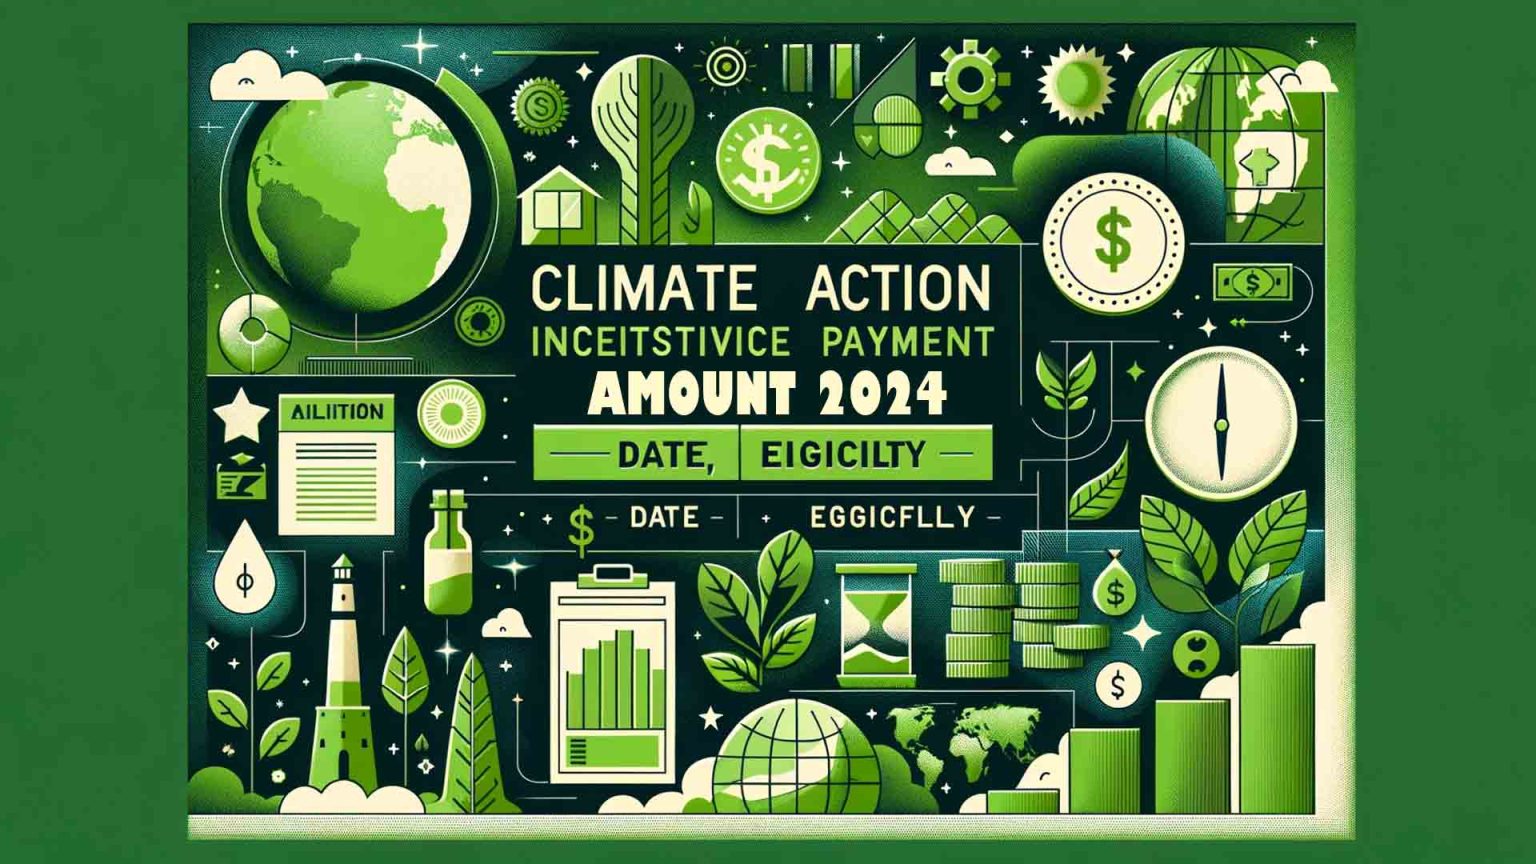 Climate Action Incentive Payment Amount 2024 Date, Eligibility BIO